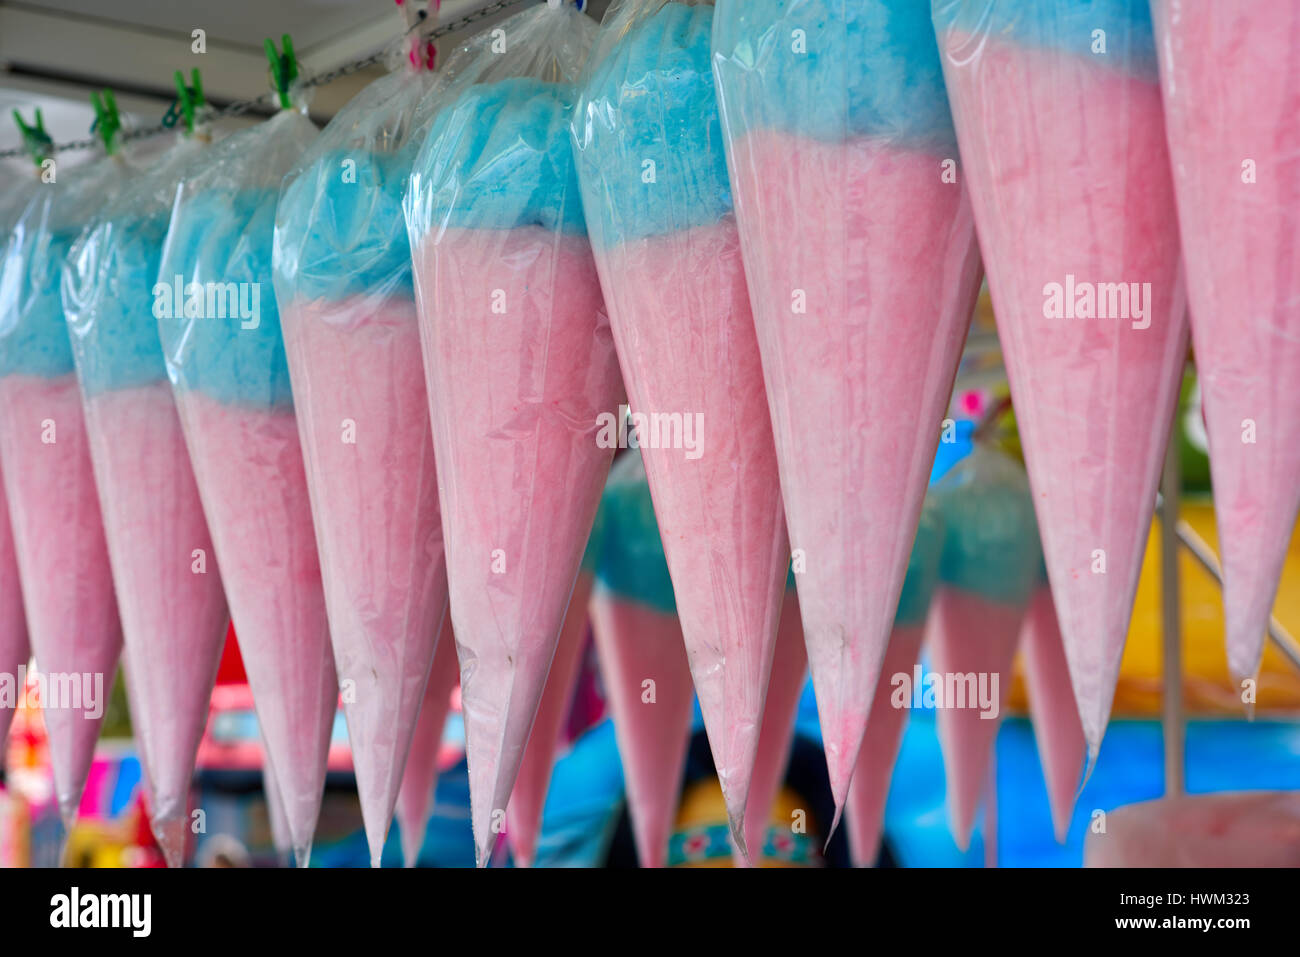 Candy floss, pink and blue found in an amusement park. Stock Photo